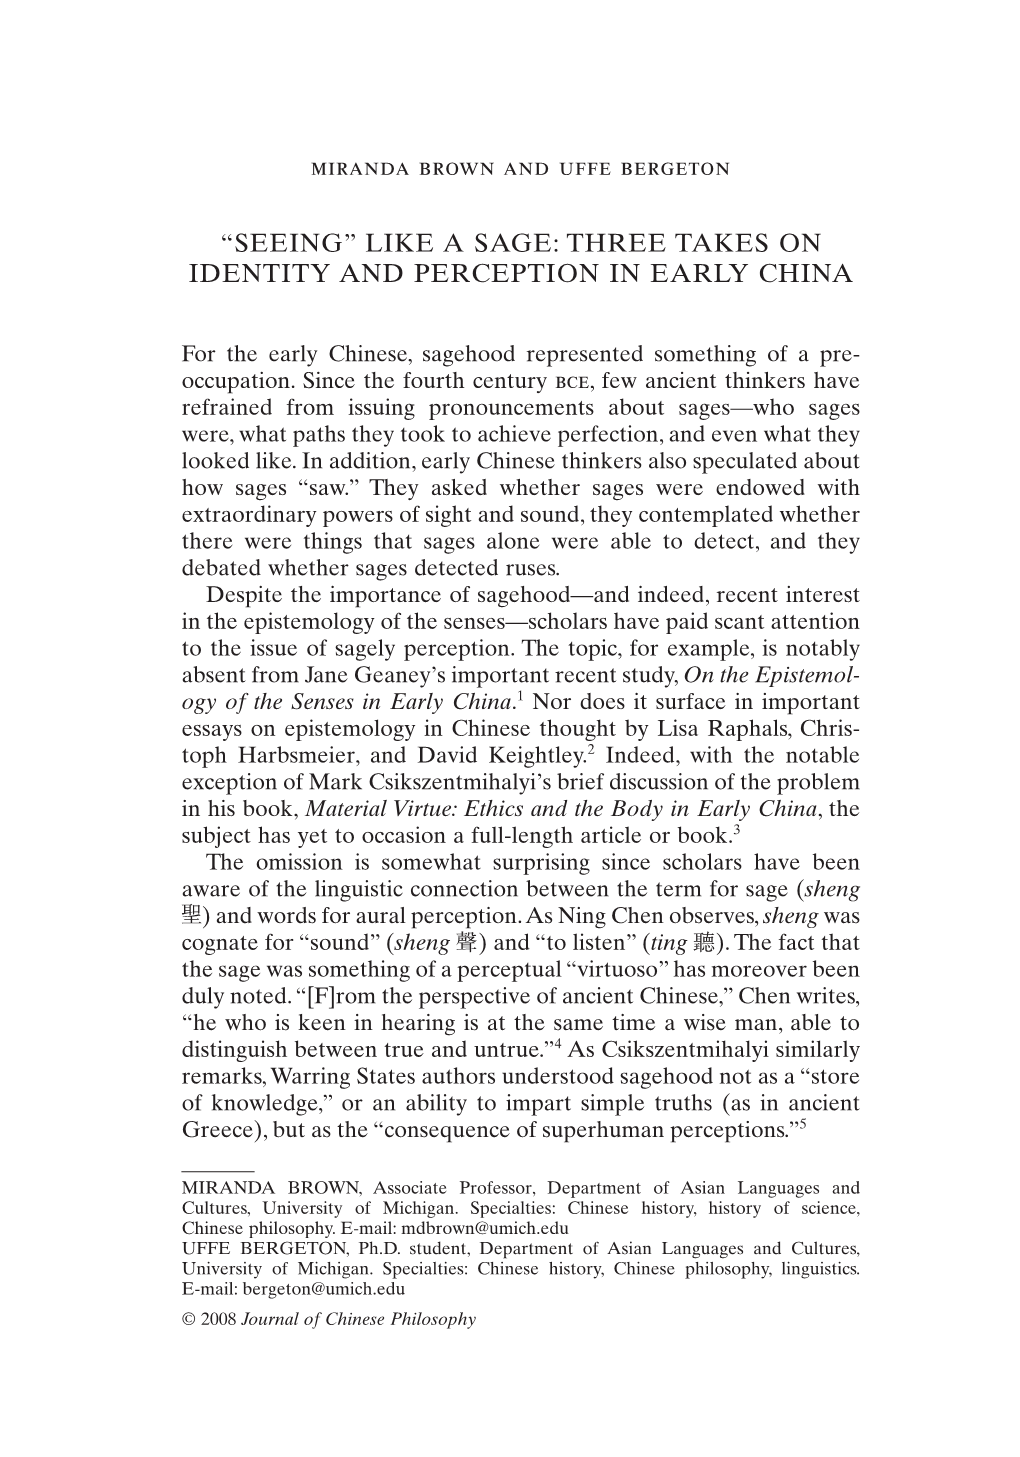 Like a Sage: Three Takes on Identity and Perception in Early China